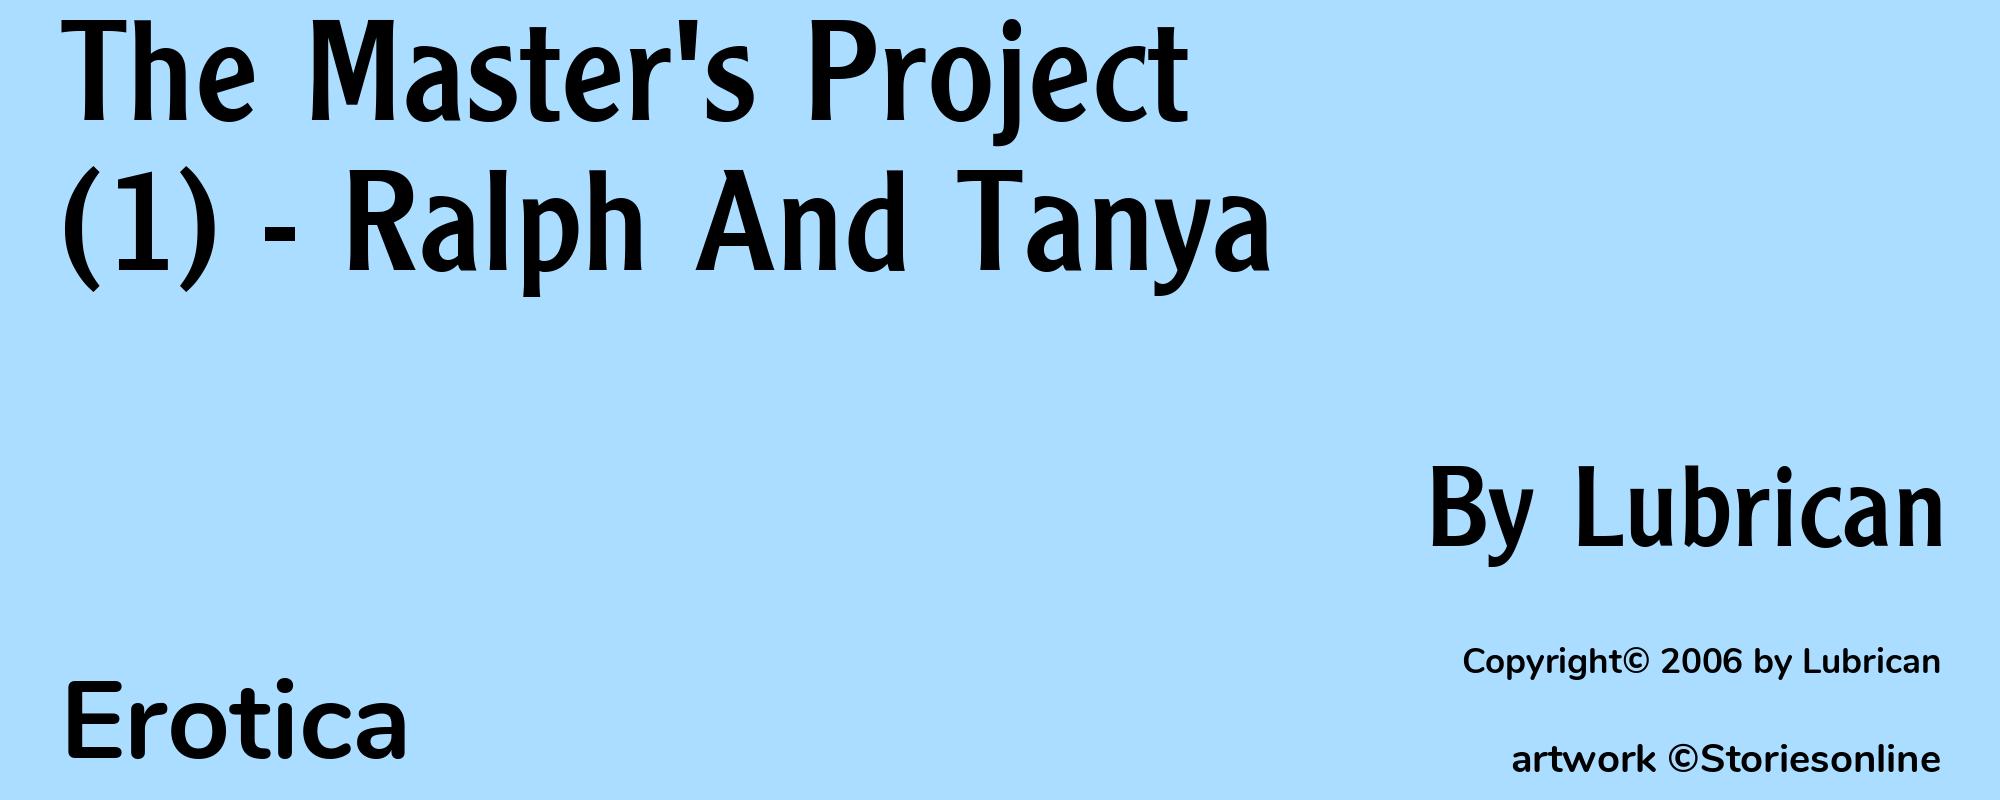 The Master's Project (1) - Ralph And Tanya - Cover